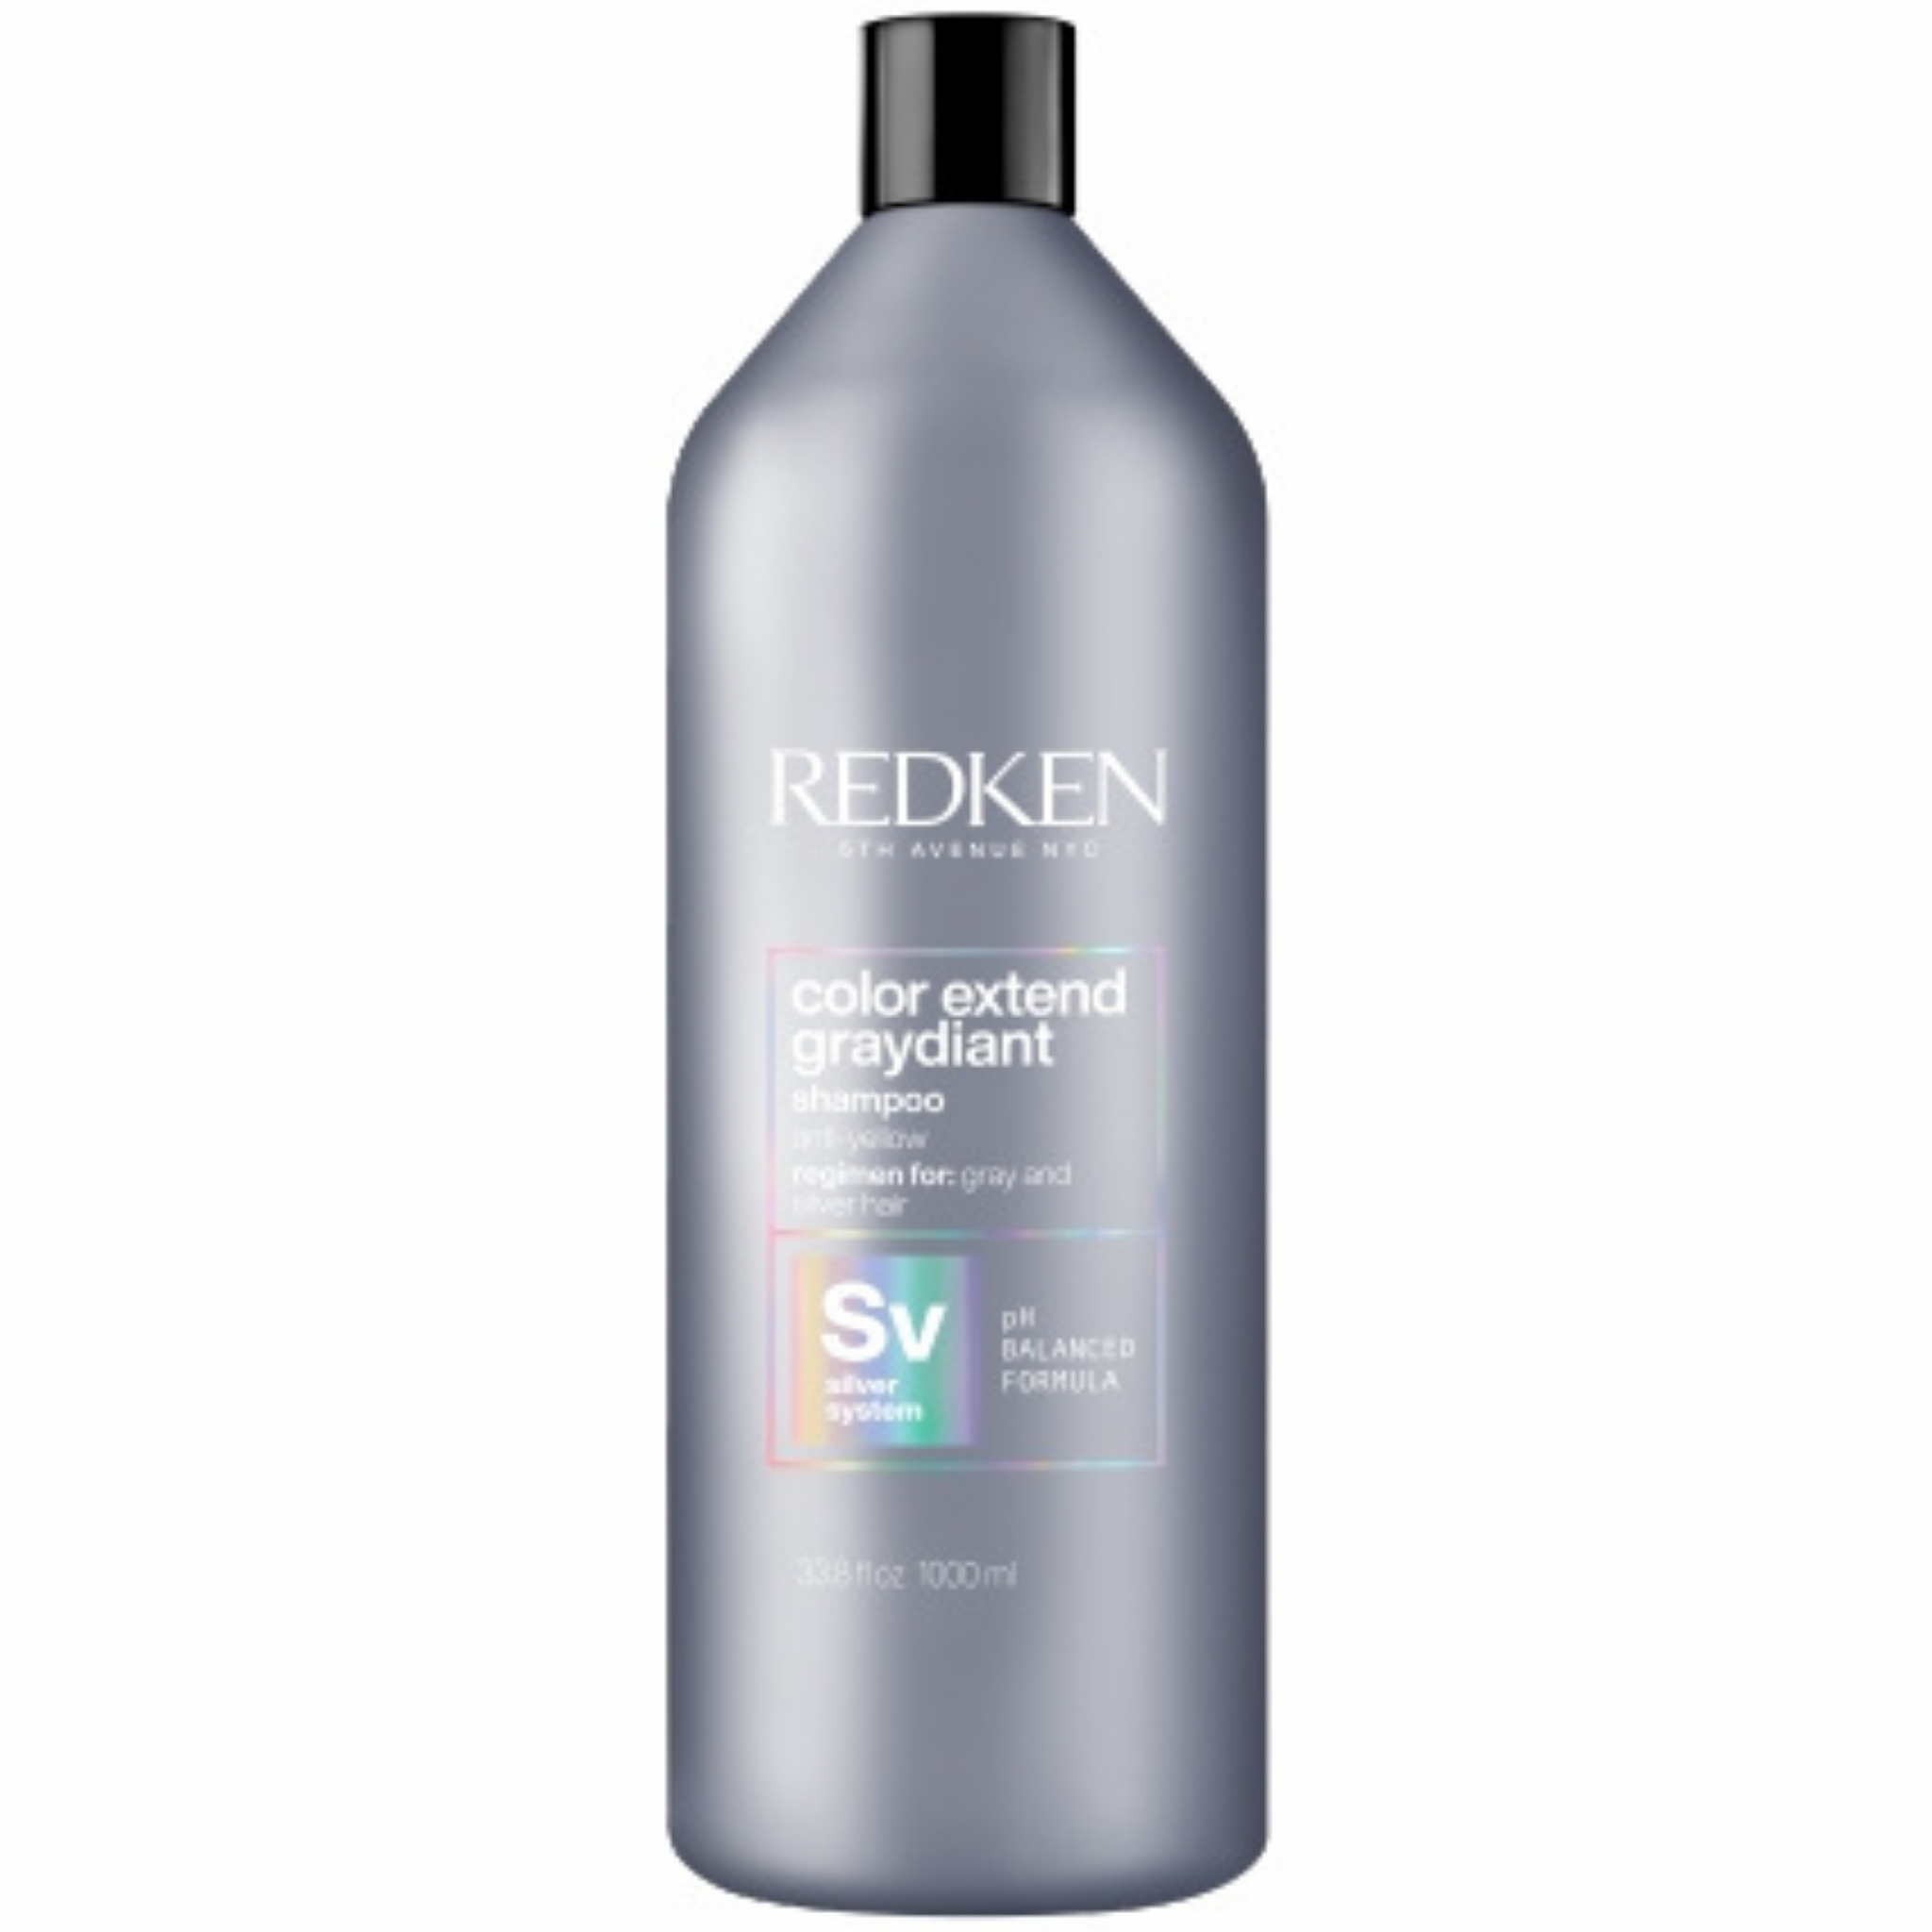 Redken. Shampoing Color Extend Graydiant - 1000 ml